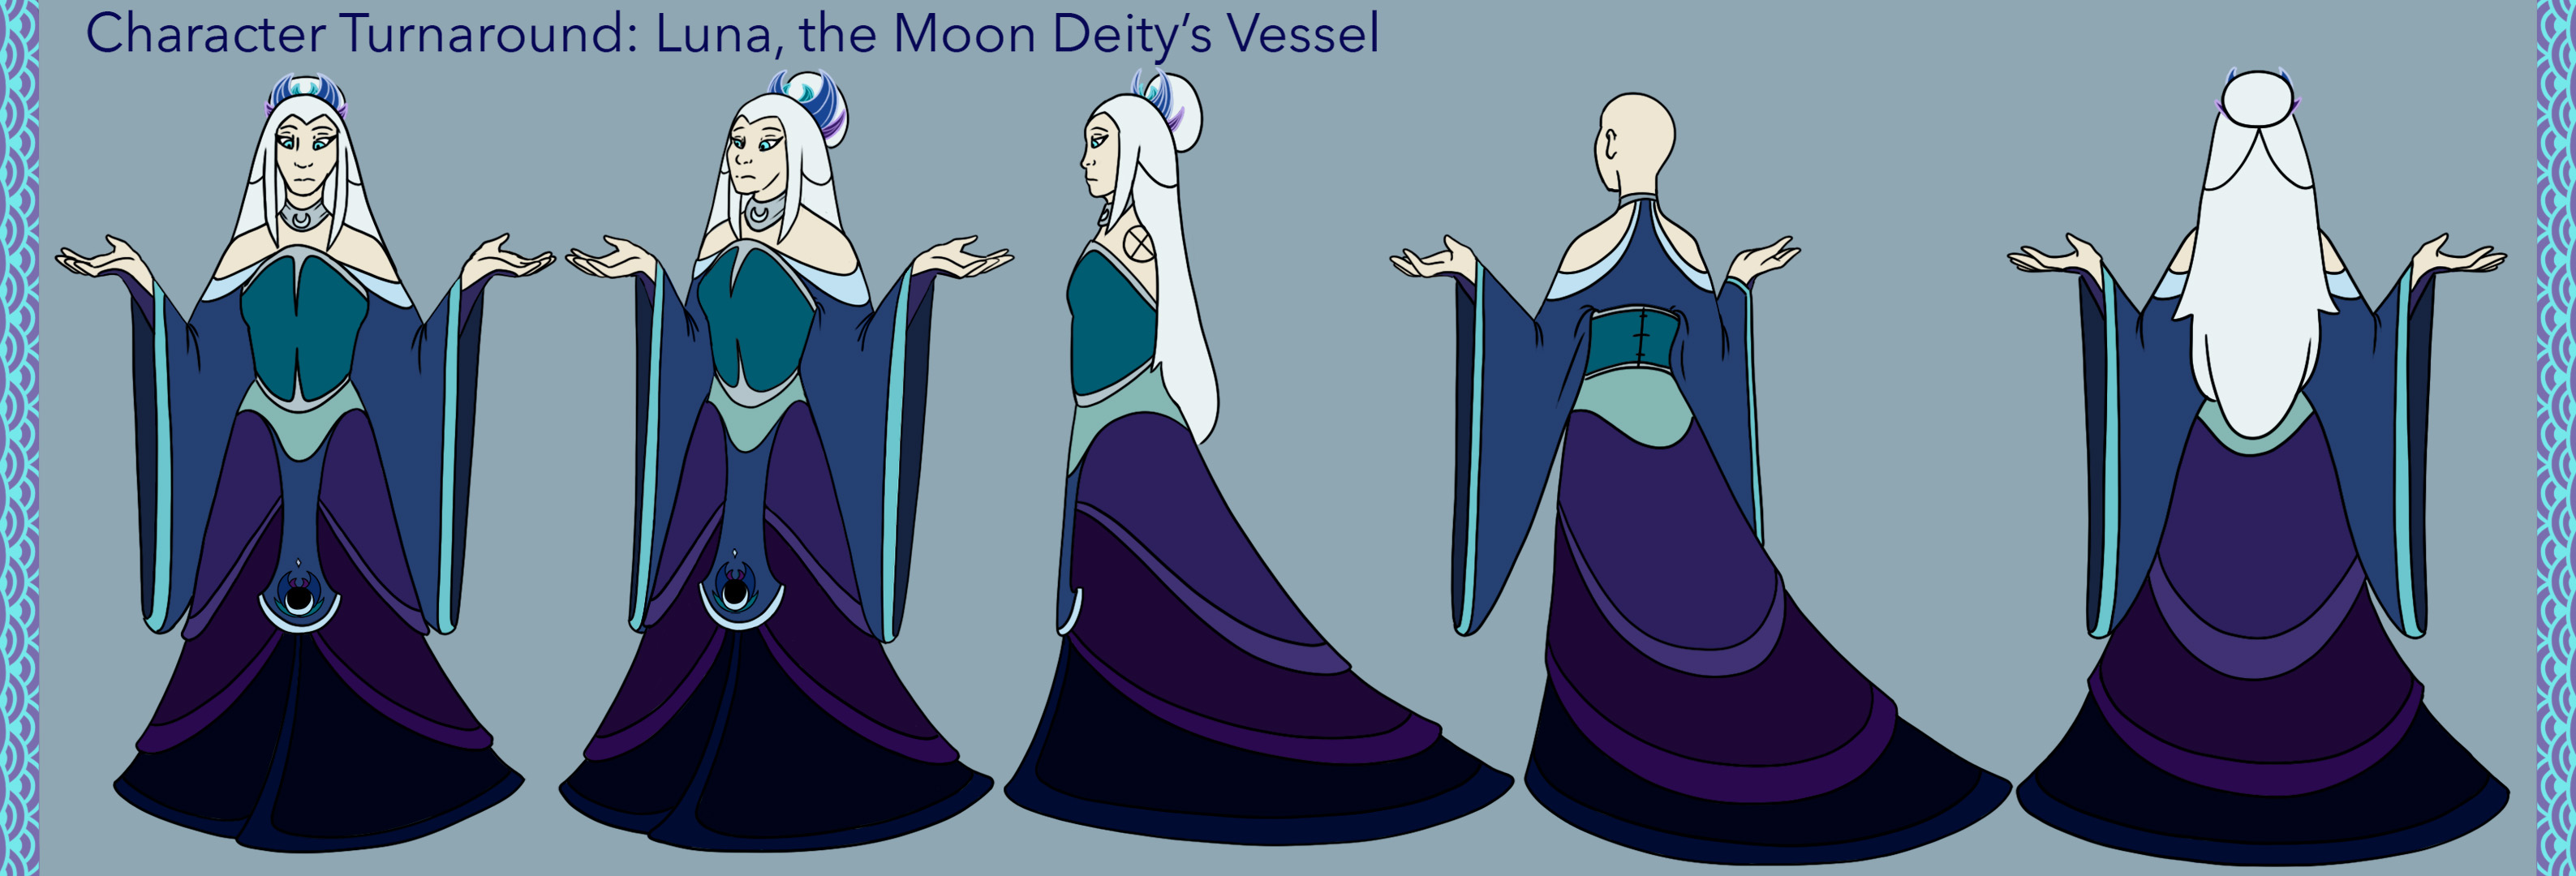  / 5-Point Turnaround of Luna, the Moon Deity's Vessel. Drawn and colored in Photoshop.